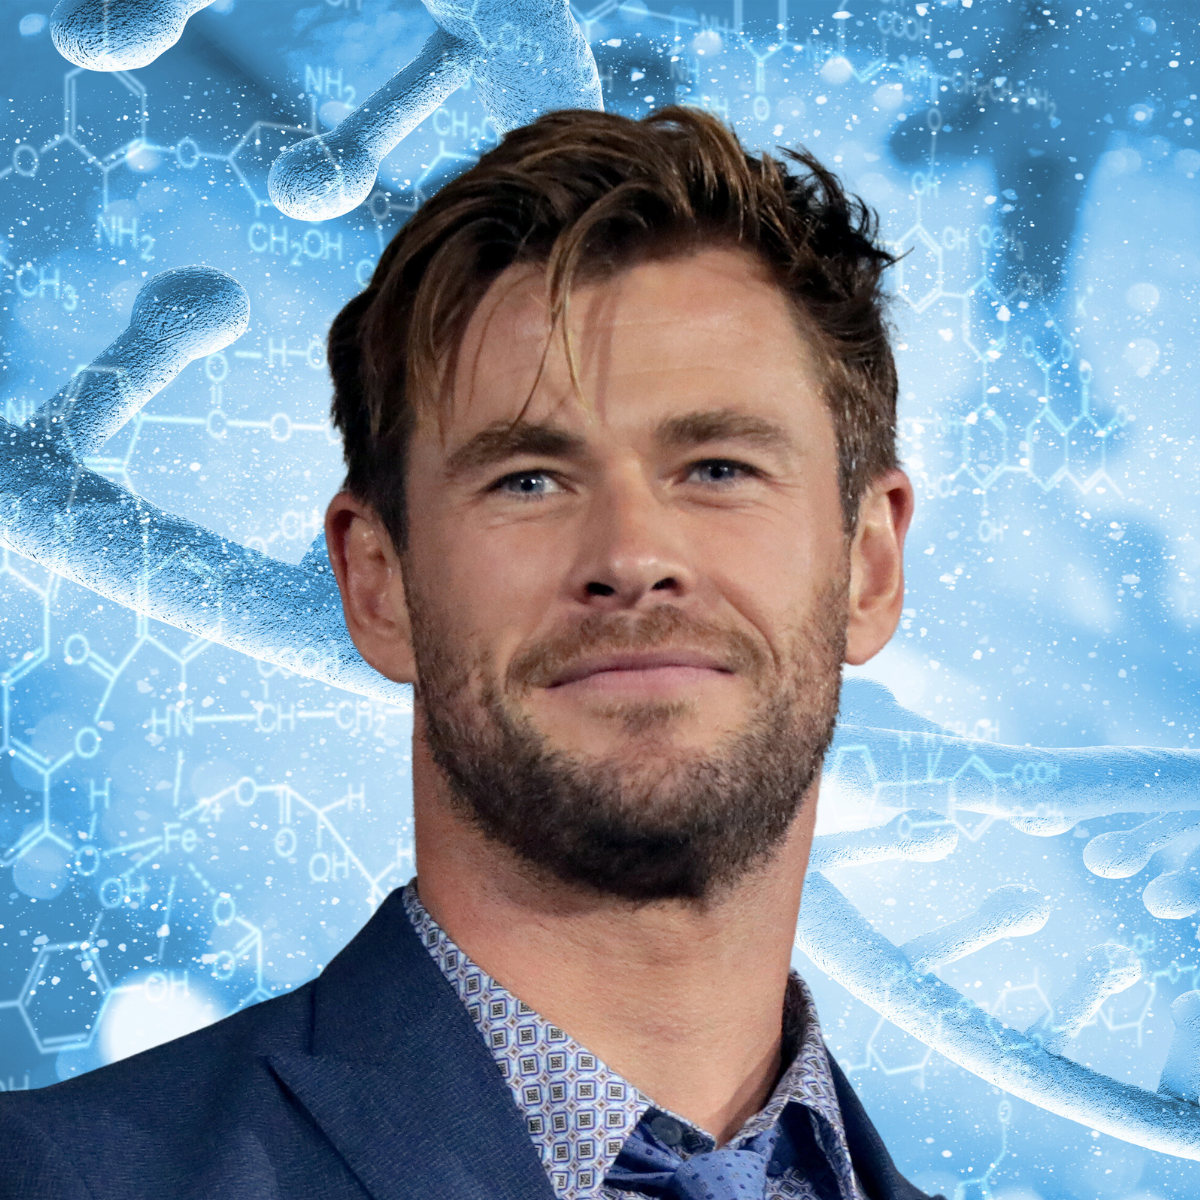 S6.07: Chris Hemsworth took a genetic test for Alzheimer's. Should you?